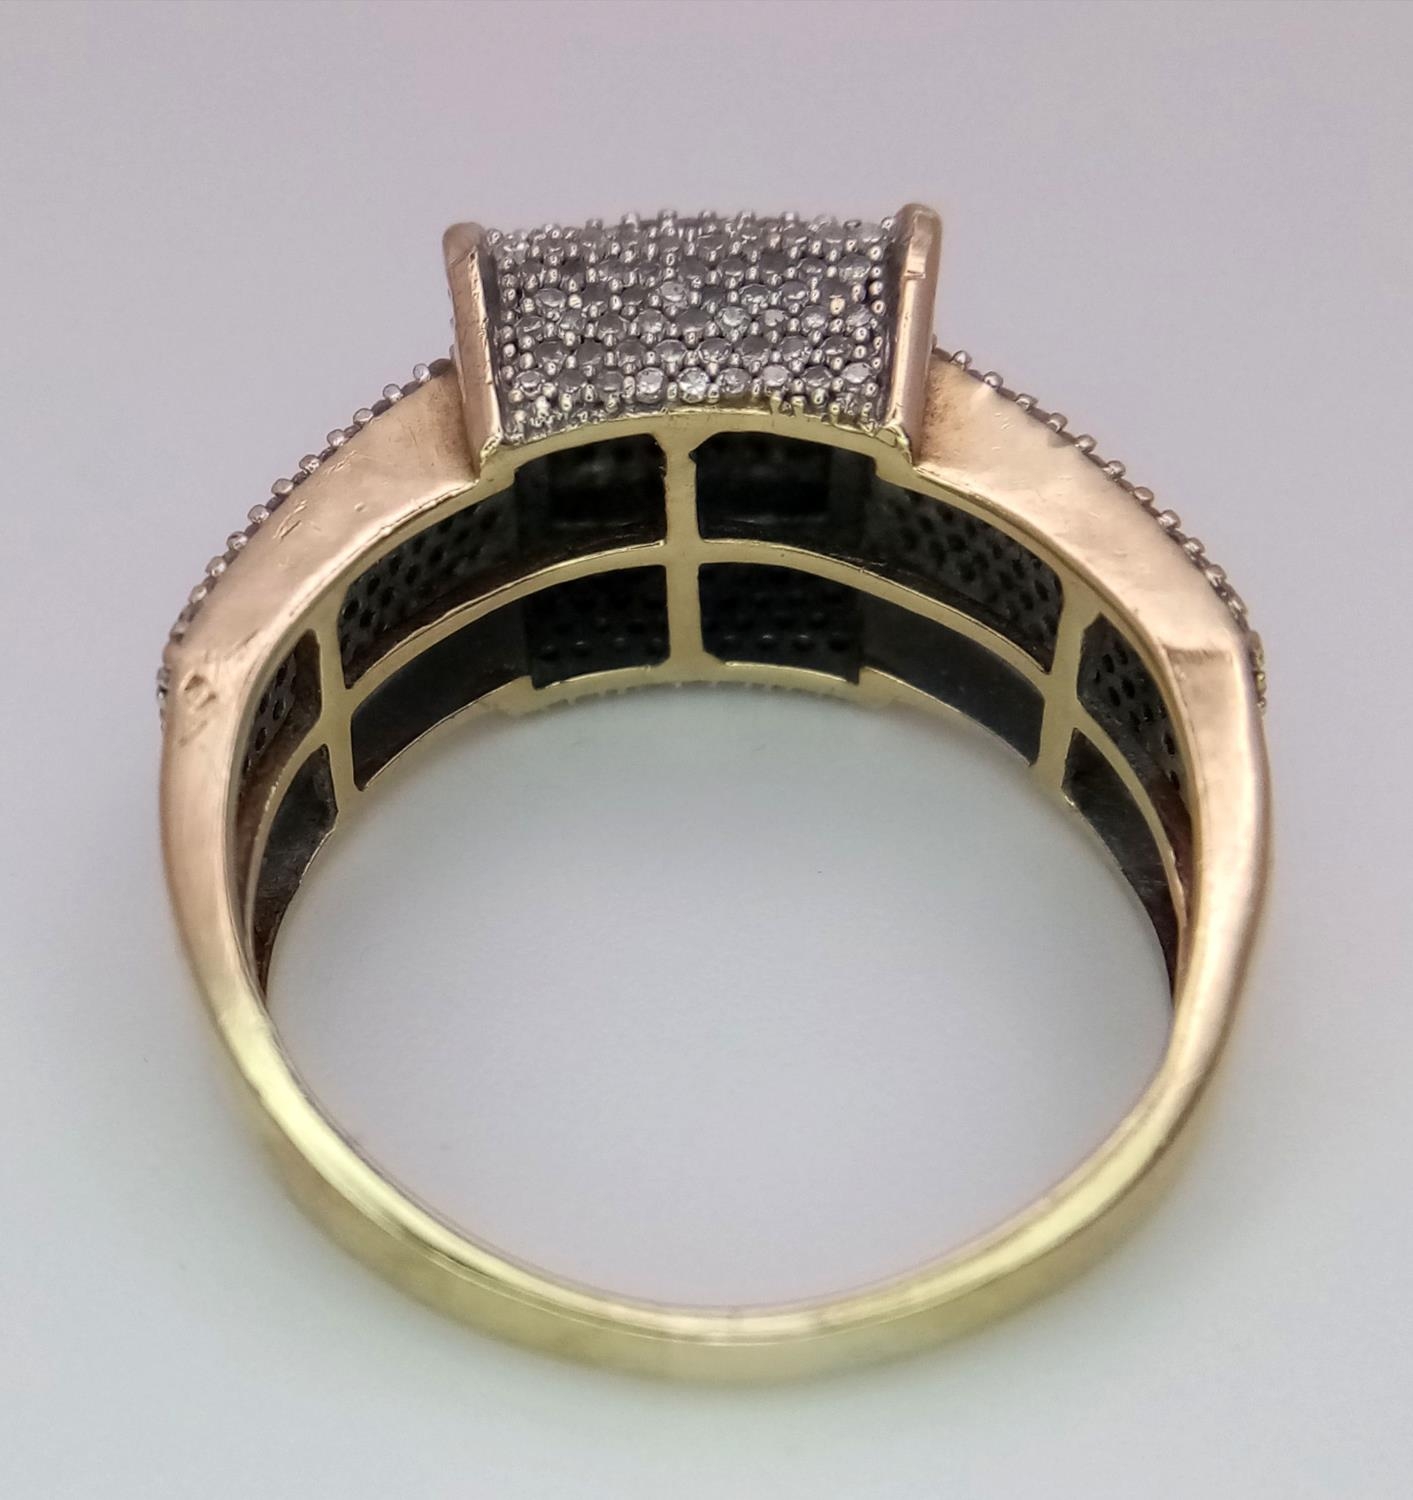 A 9ct Yellow Gold Pave Set Diamond Ring, over 2ct Diamonds, size P, 5.6g. ref: PWN3212 - Image 4 of 6